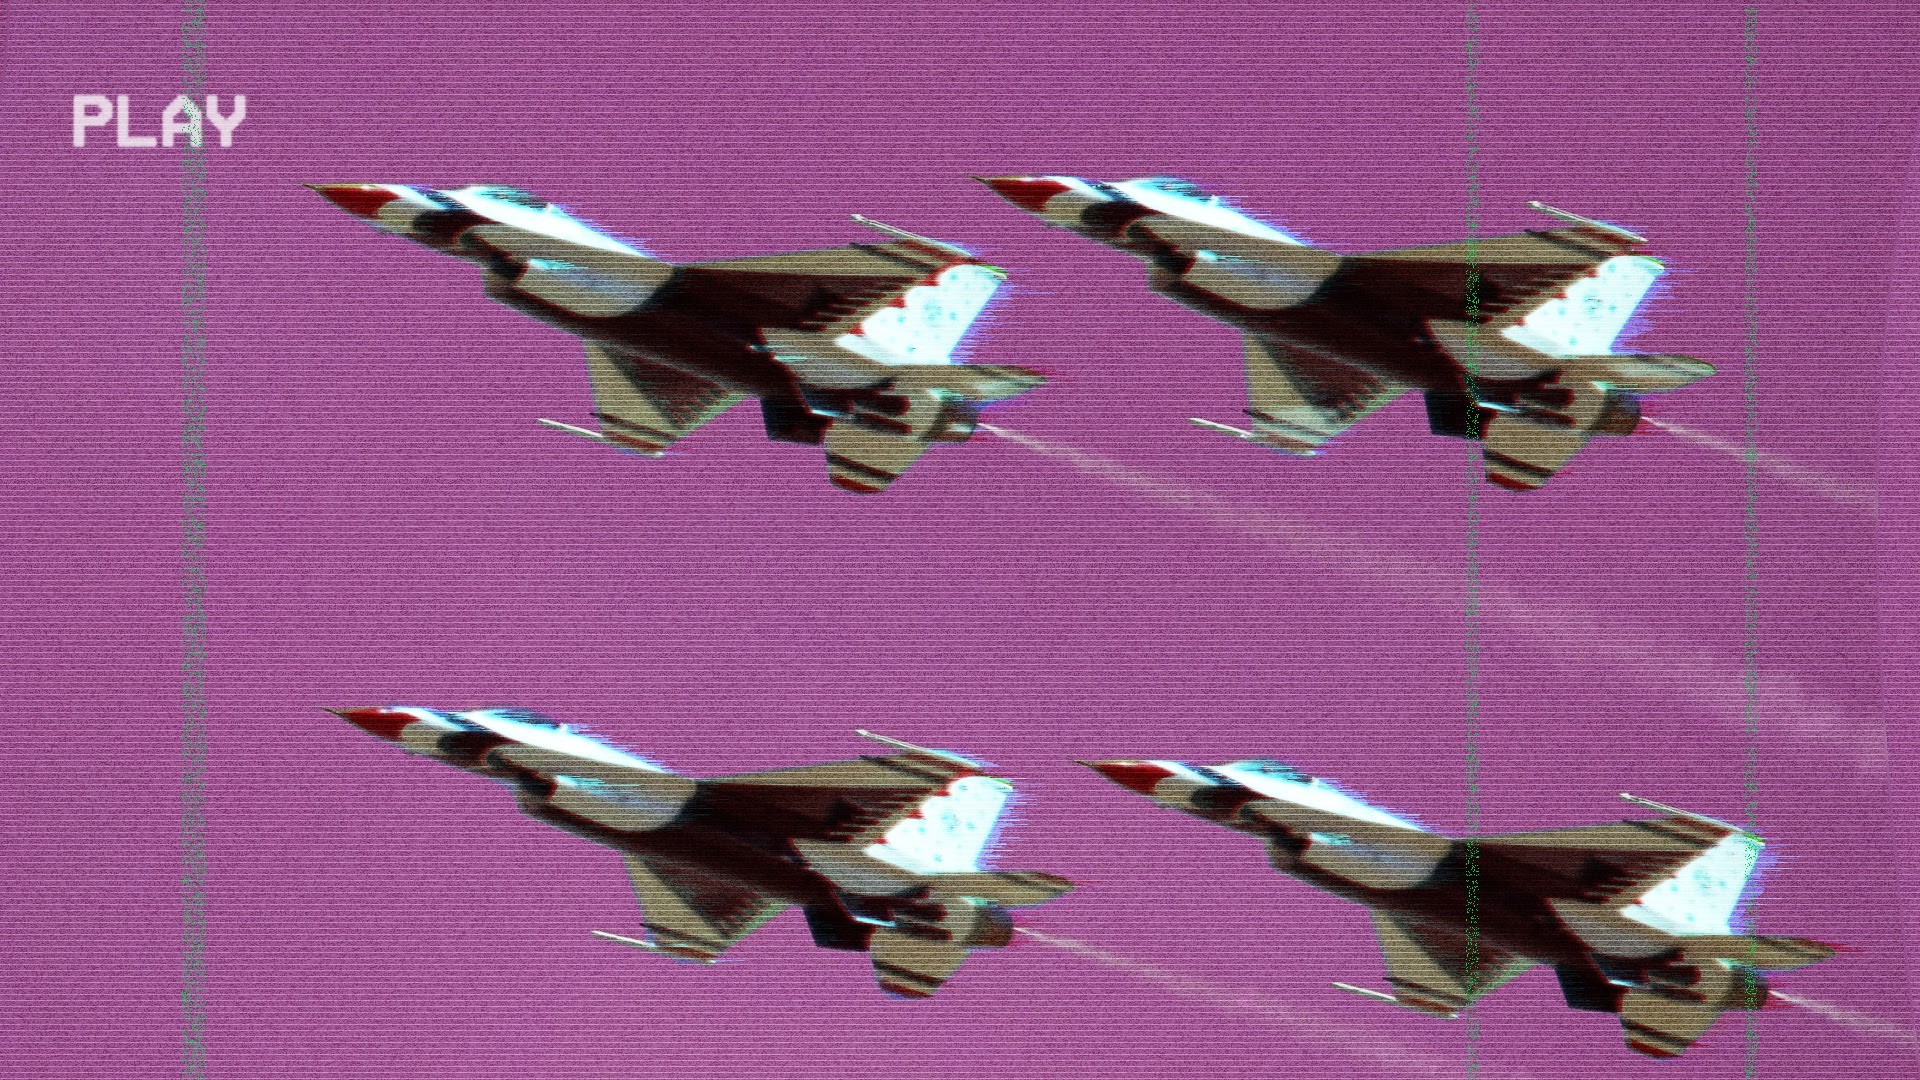 General 1920x1080 aircraft vaporwave glitch art Multirole fighter General Dynamics F-16 Fighting Falcon VHS military vehicle military aircraft vehicle US Air Force thunderbirds Formation NATOwave aerobatic team